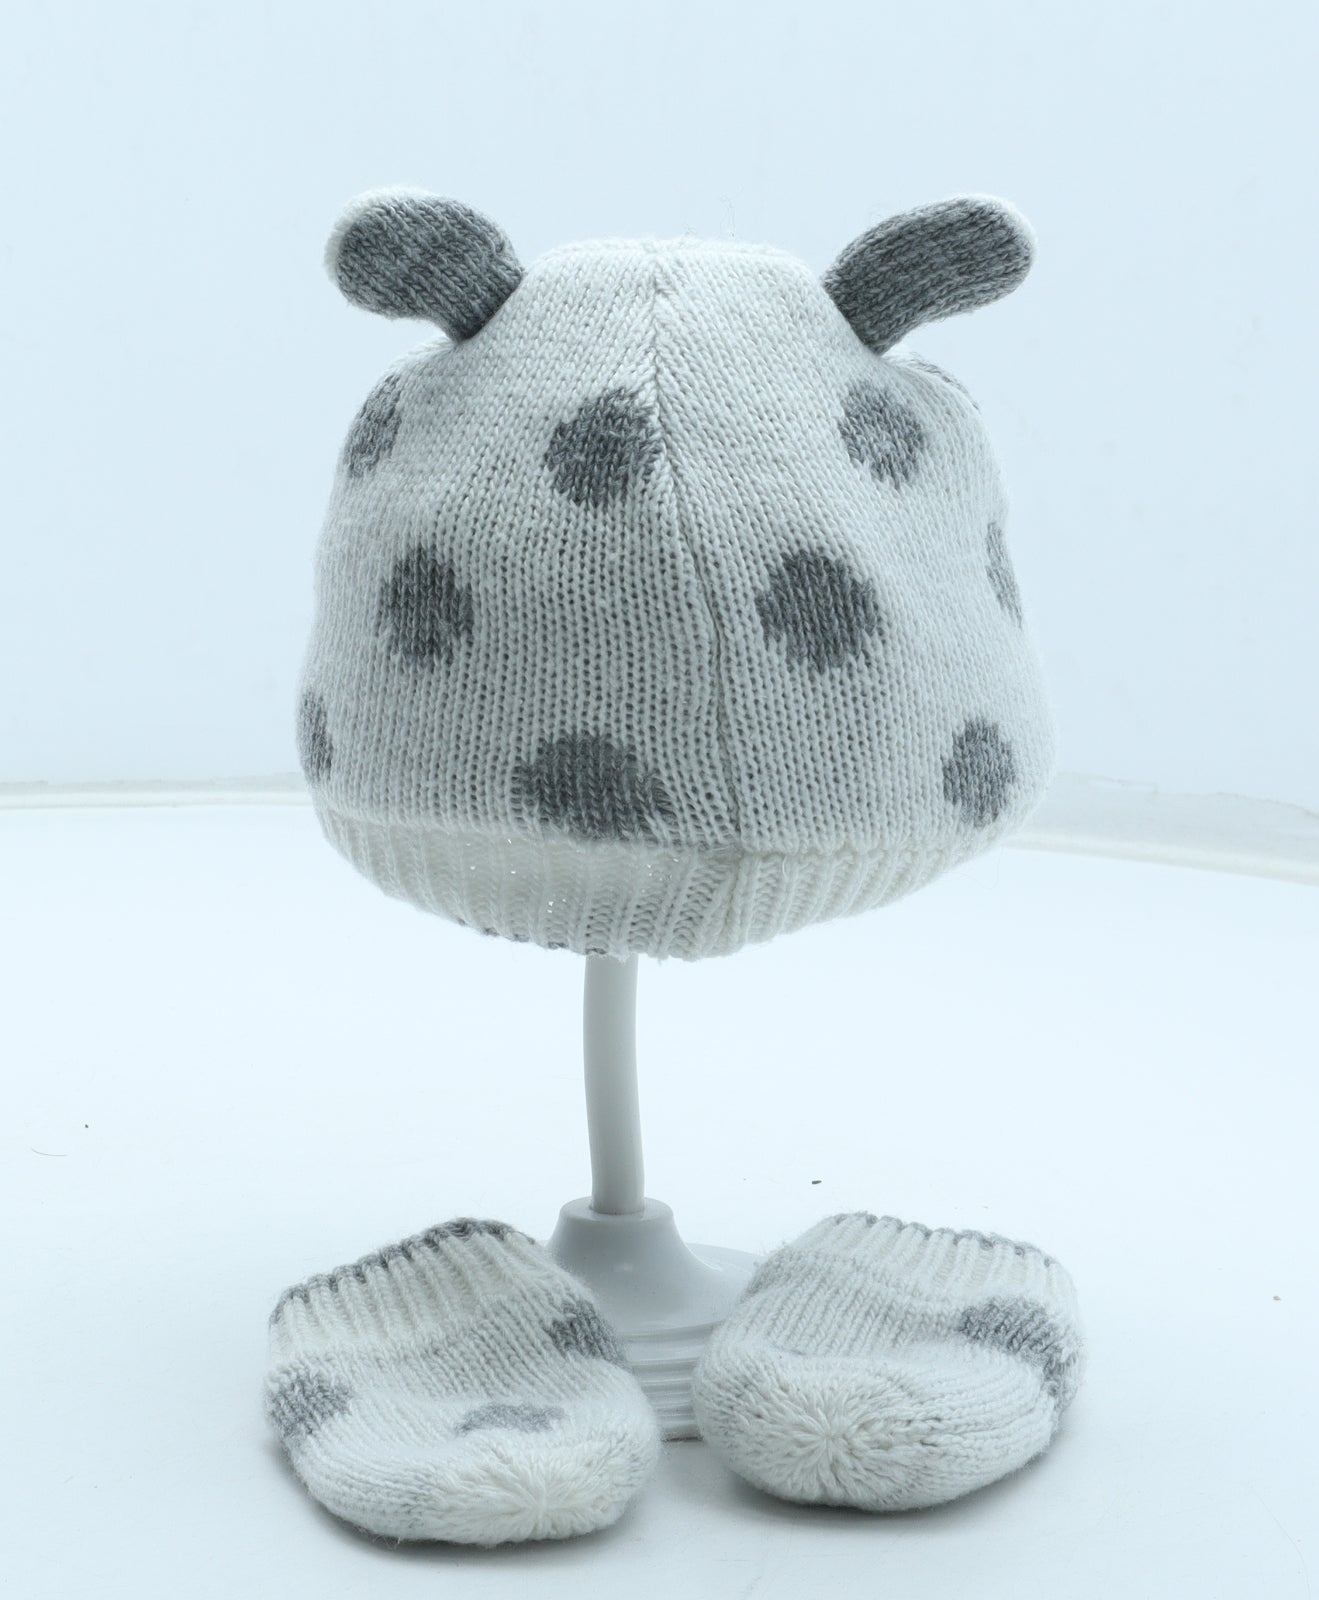 Marks and Spencer Girls White Polka Dot Acrylic Beanie Size S - Mittens included UK Size 0-3 months